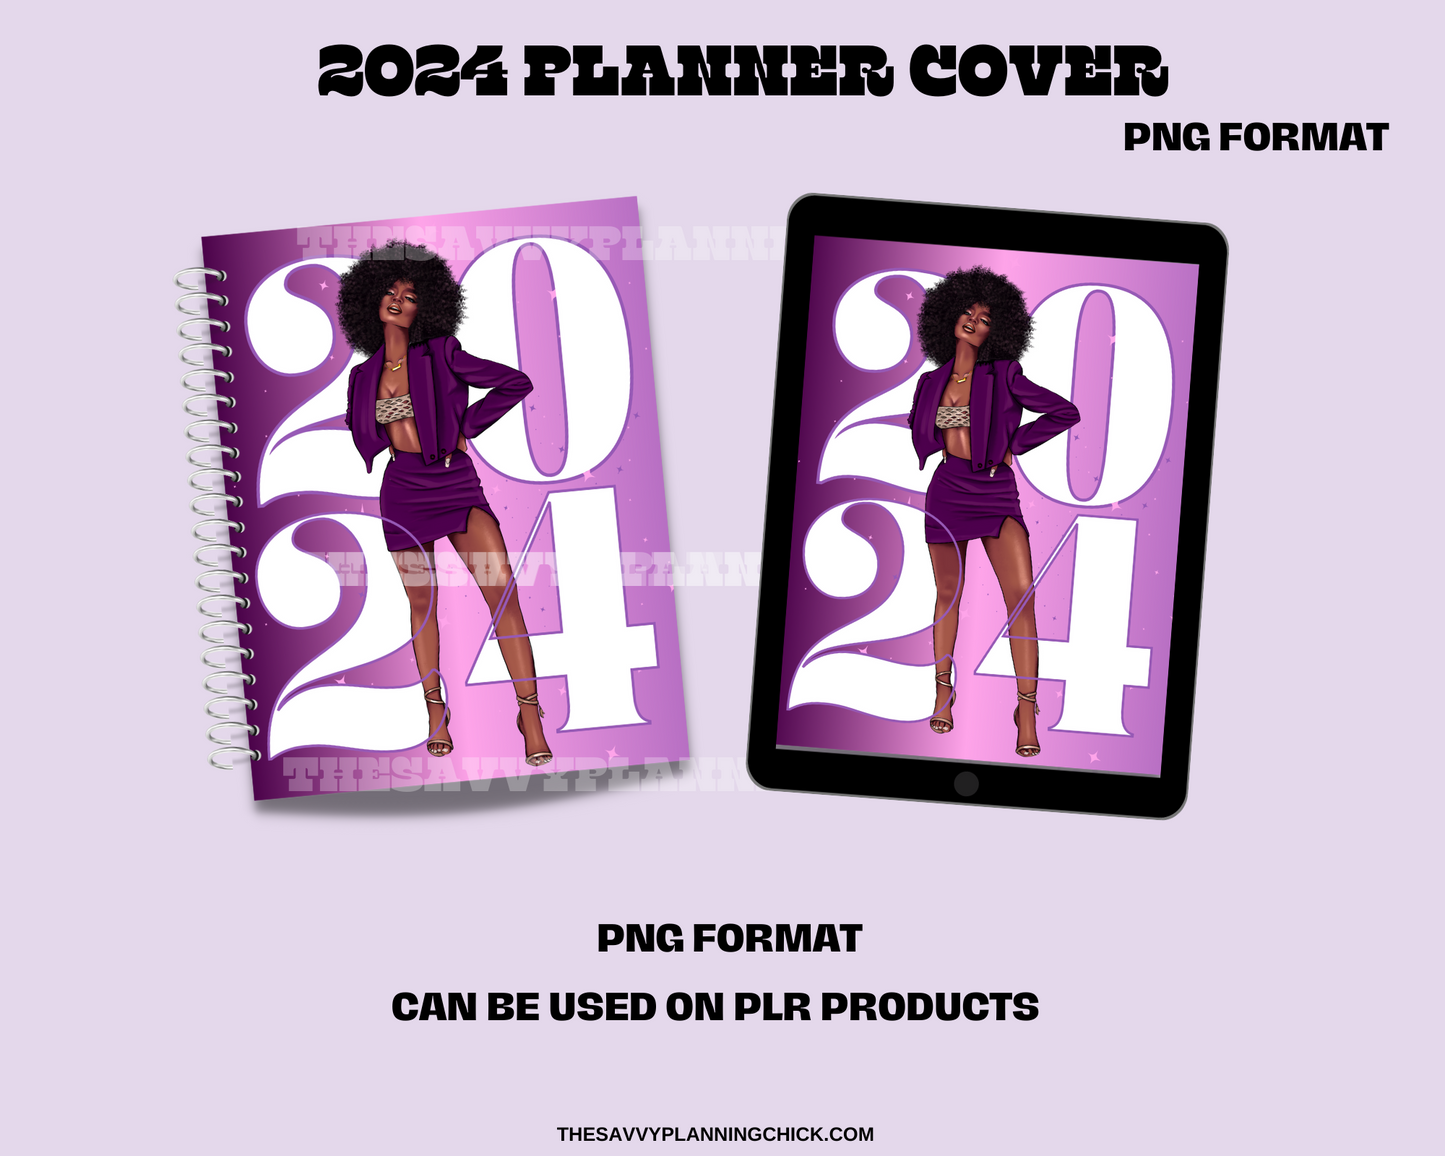 2024 PLANNER COVER-Radiant Amethyst Ombre